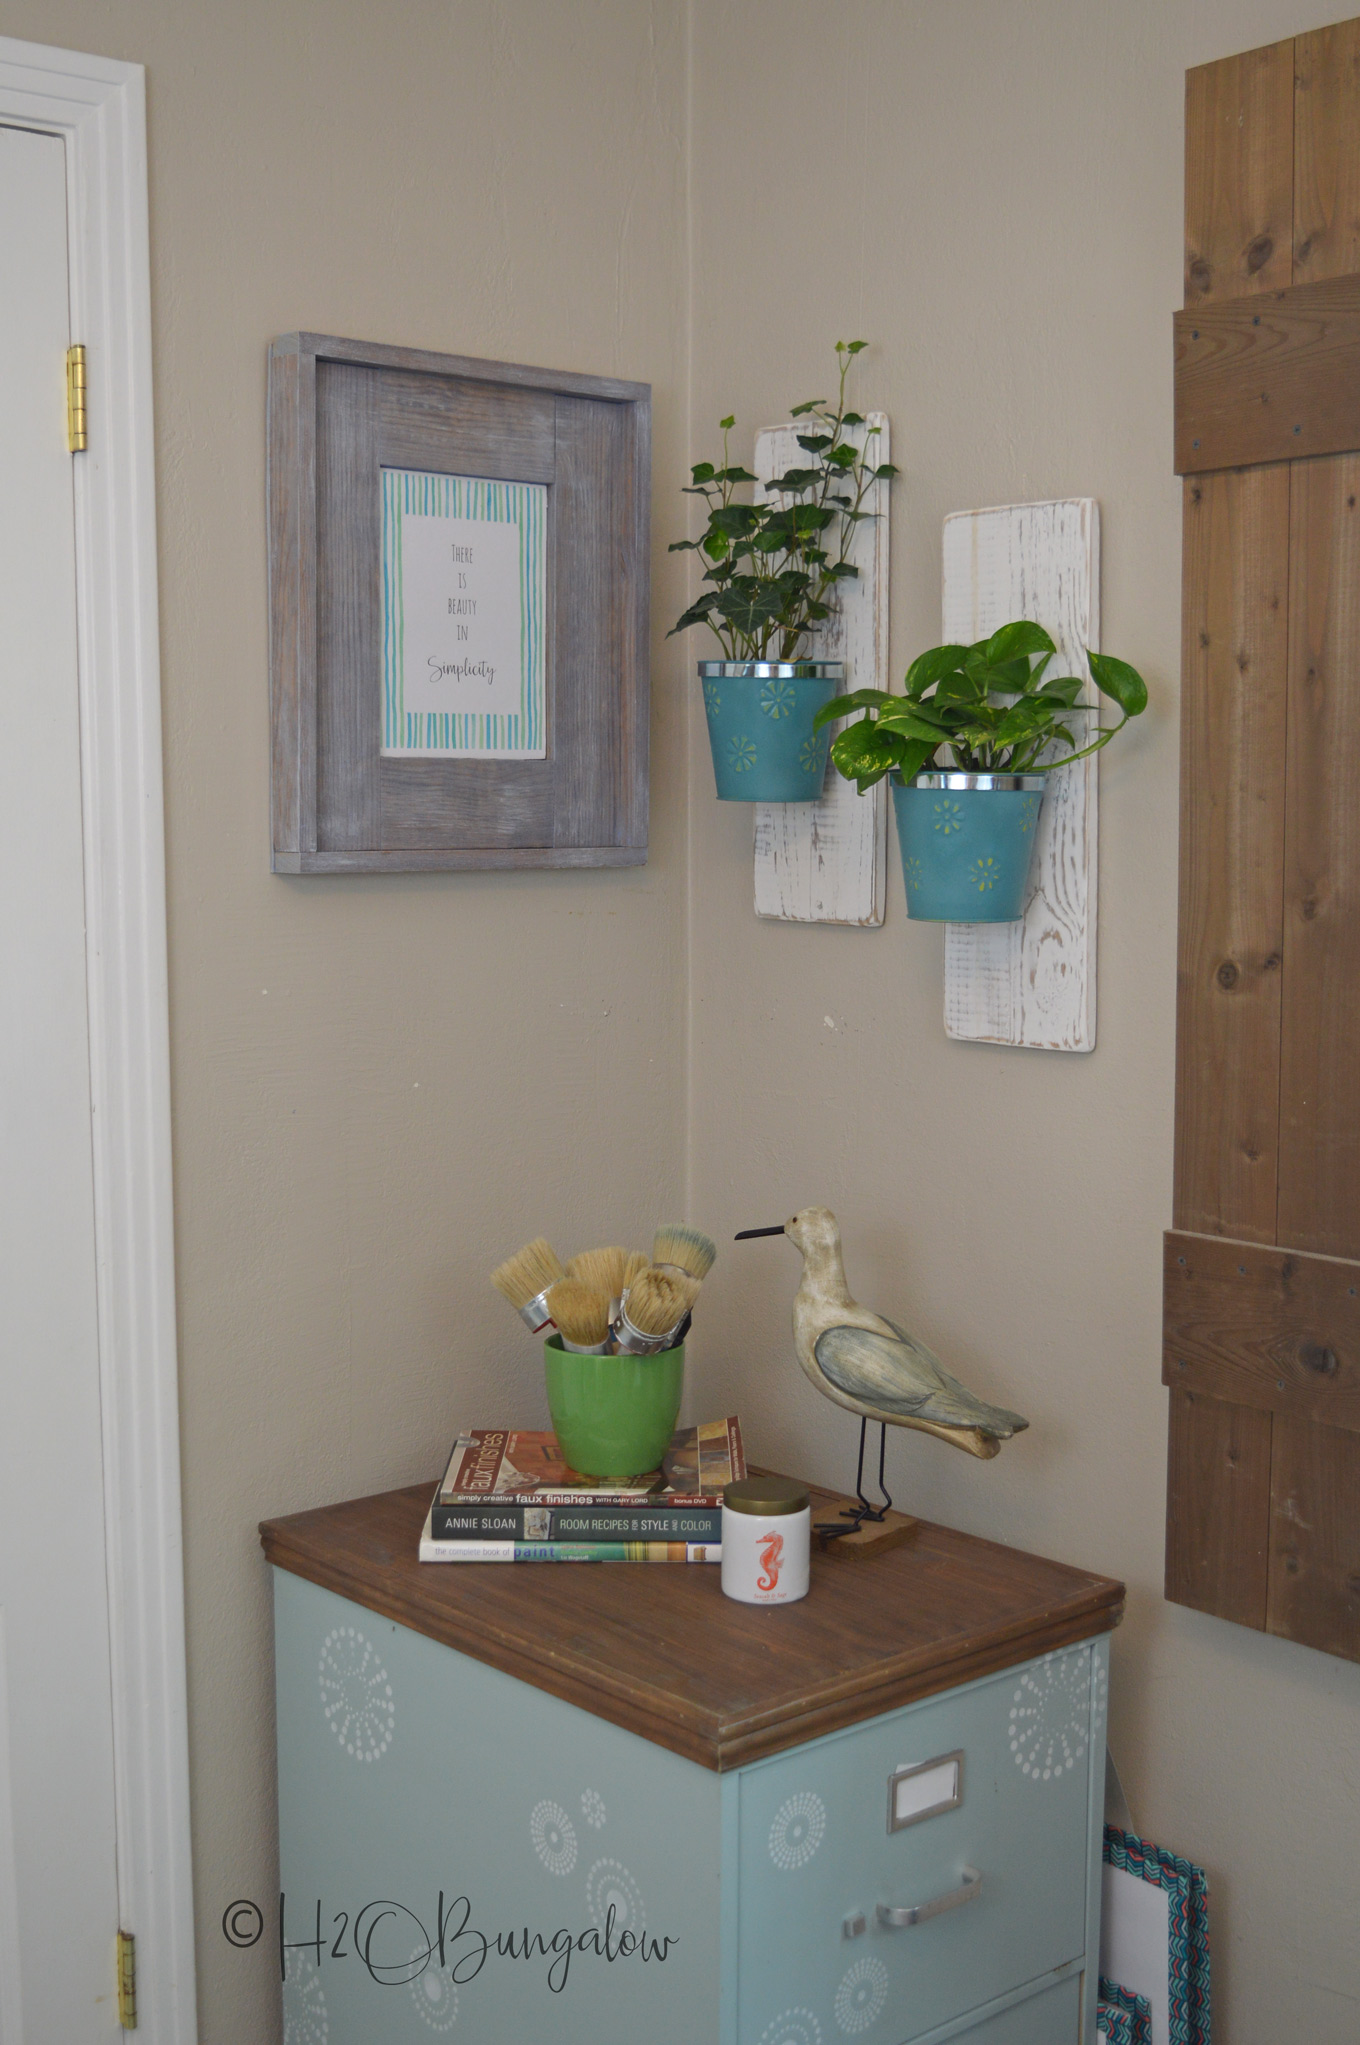 Easy to follow tutorial and video on how to build an easy DIY rustic picture frame to hang on the wall. Make a DIY frame to hold photos, art and printables. Change the finish for a beachy or modern farmhouse frame style. Make several sized wood frames and stack them in a vignette for a great look.